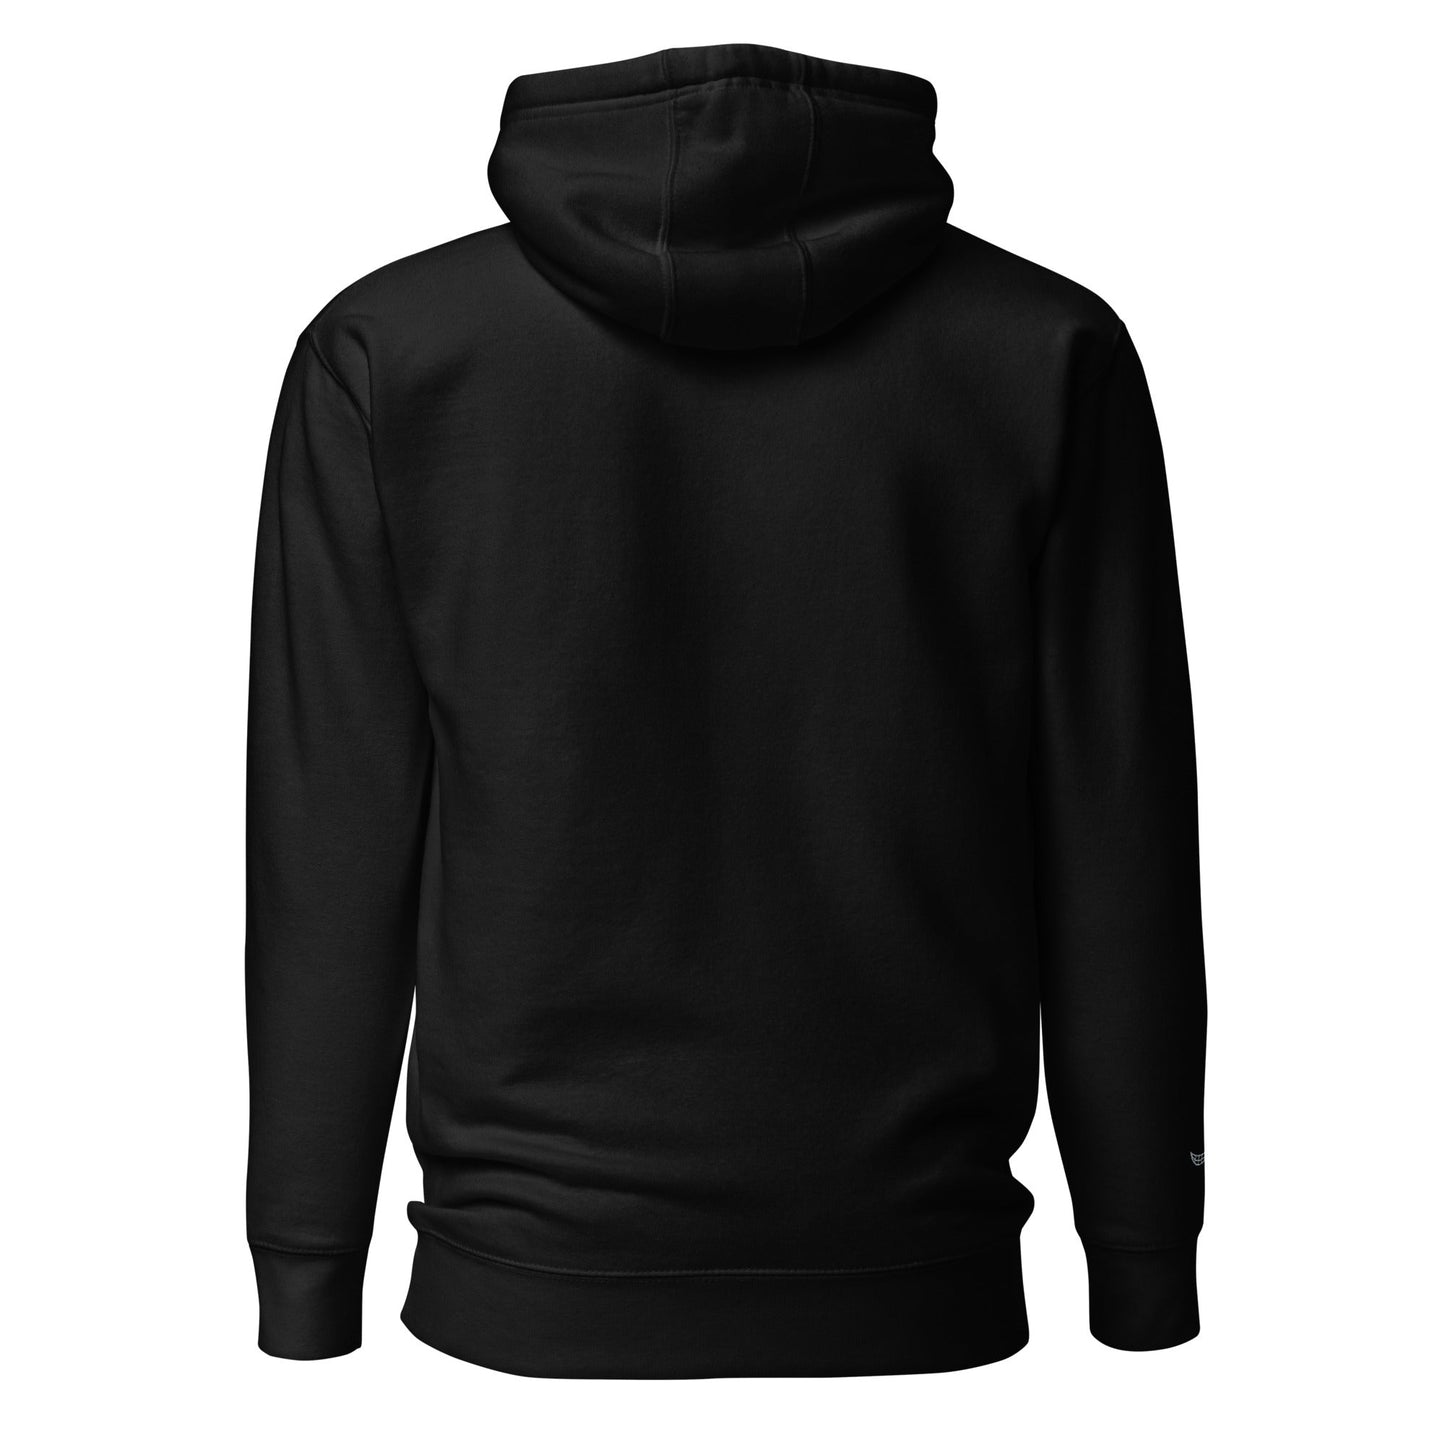 Gym Bros Embroidered Unisex Hoodie - chucklecouture co.